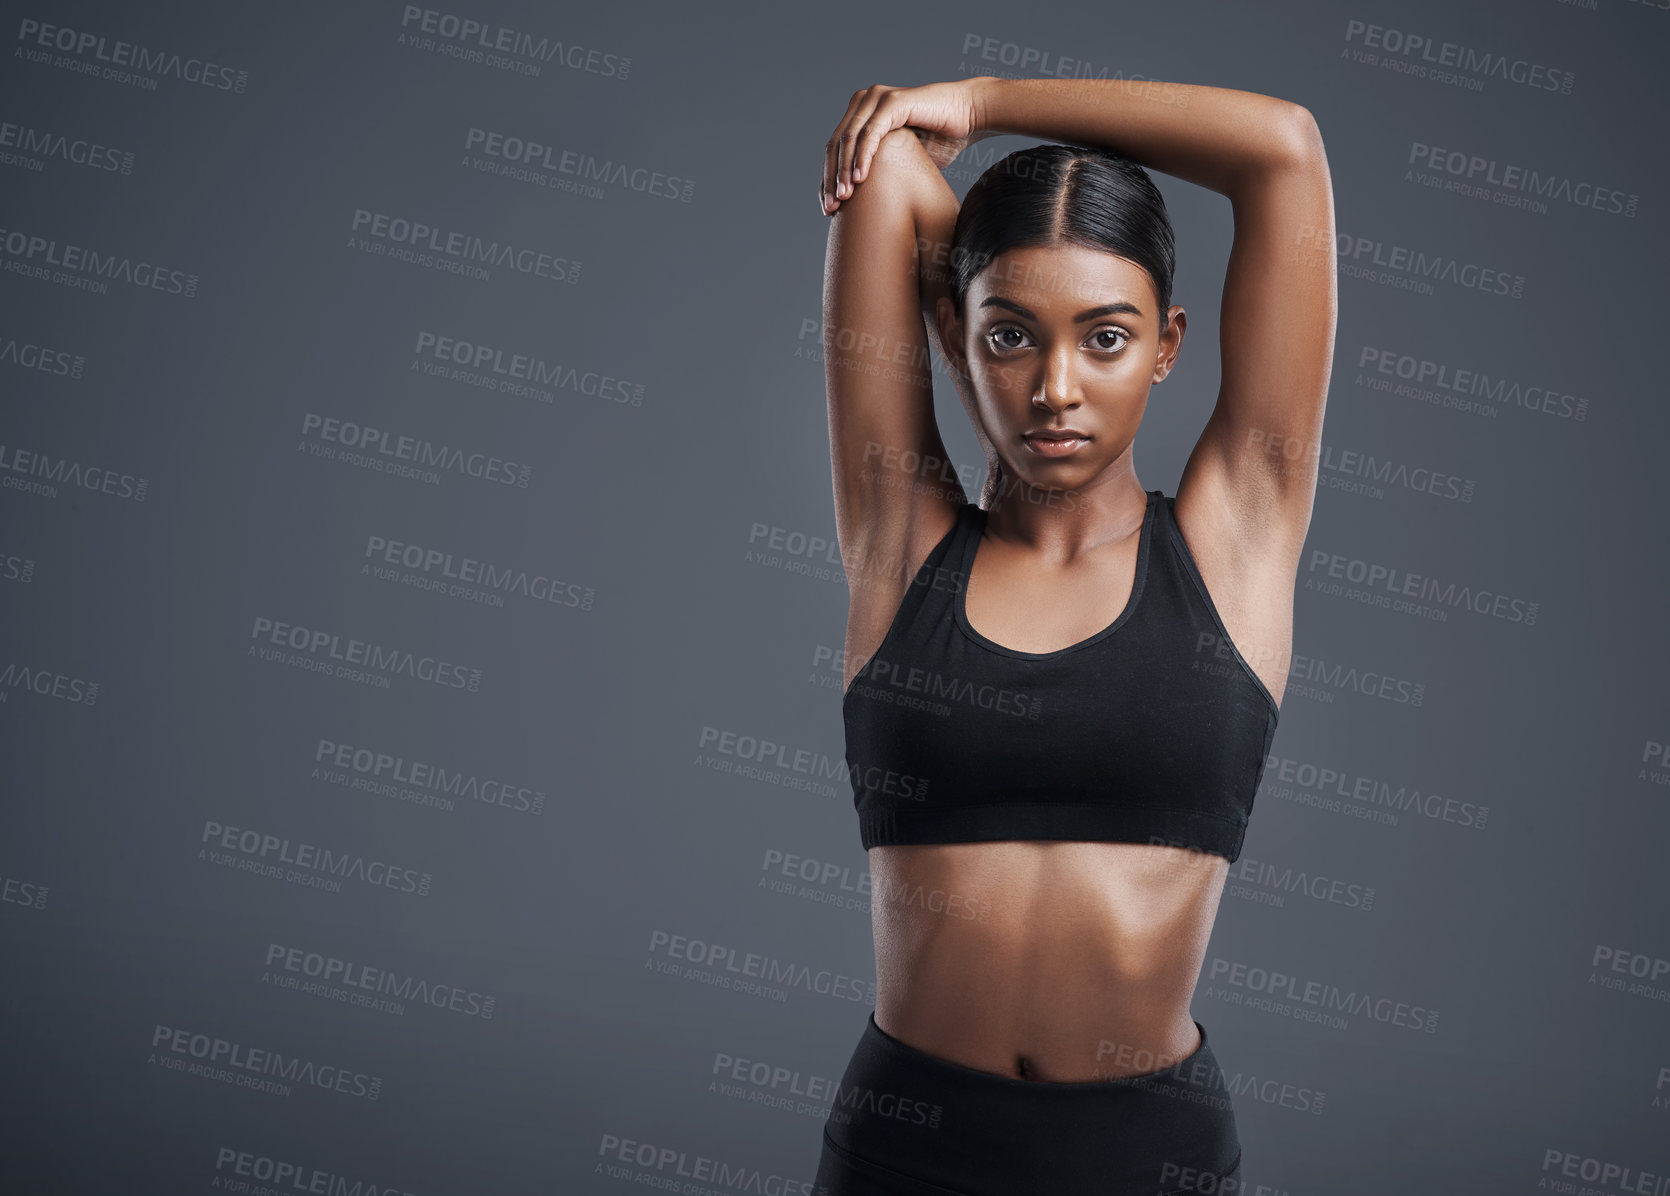 Buy stock photo Portrait, mock up and stretching with an athlete woman in studio on a gray background for fitness or health. Exercise, workout or getting ready with an attractive young female model training her body